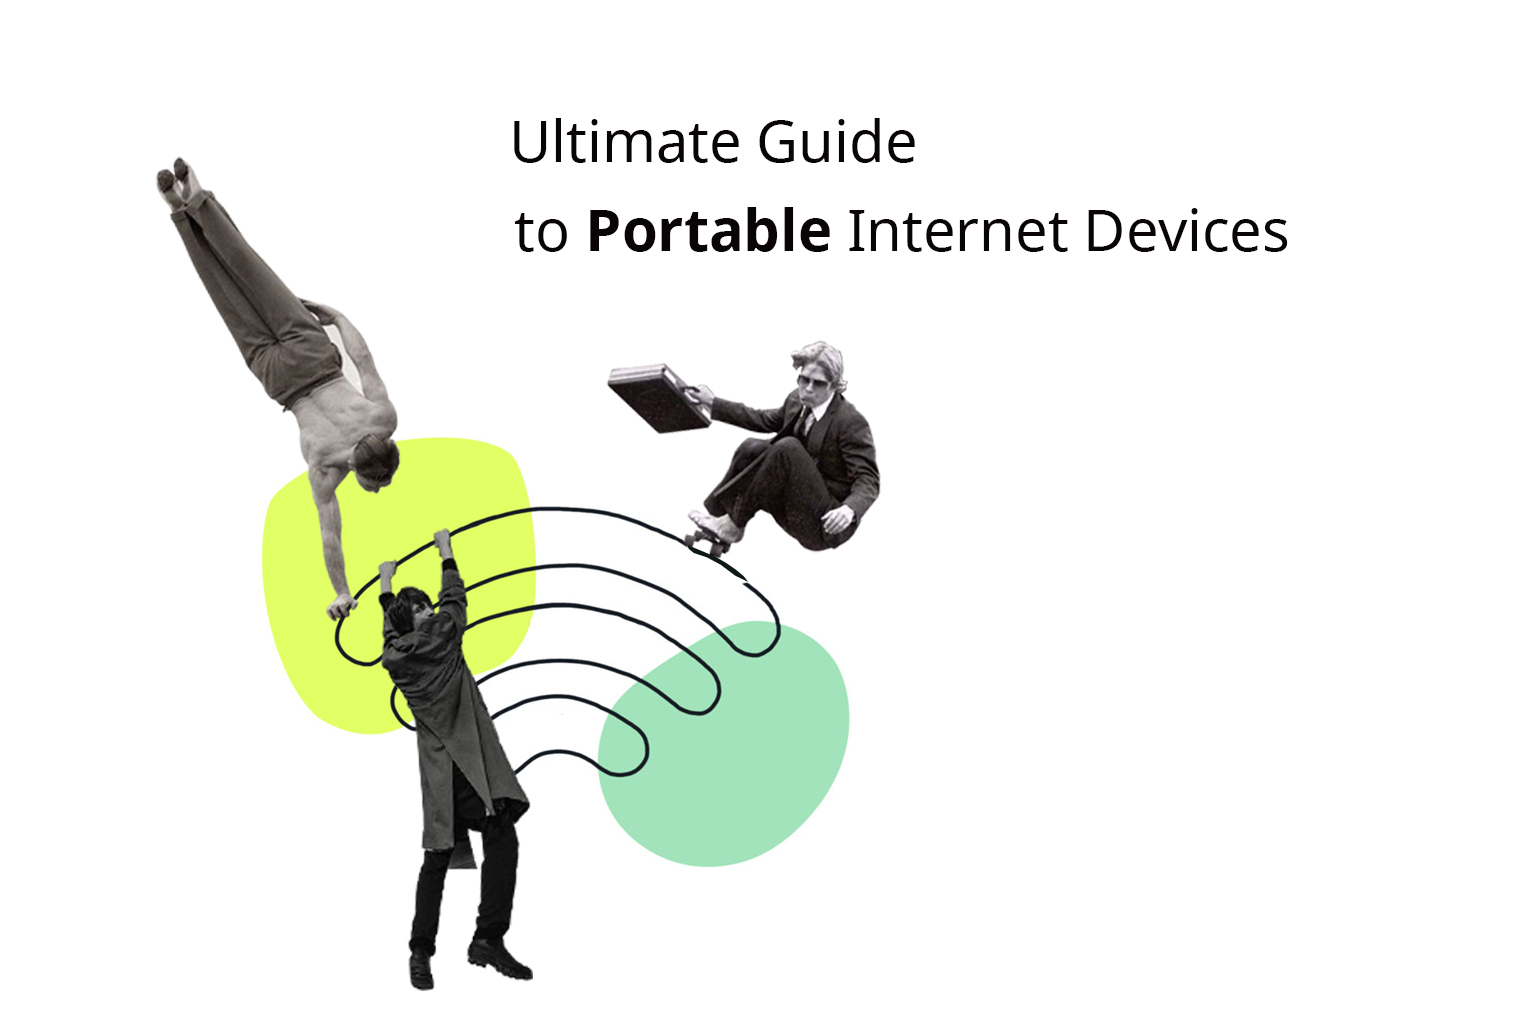 portable Internet devices: modem, router, dongle and hotspot